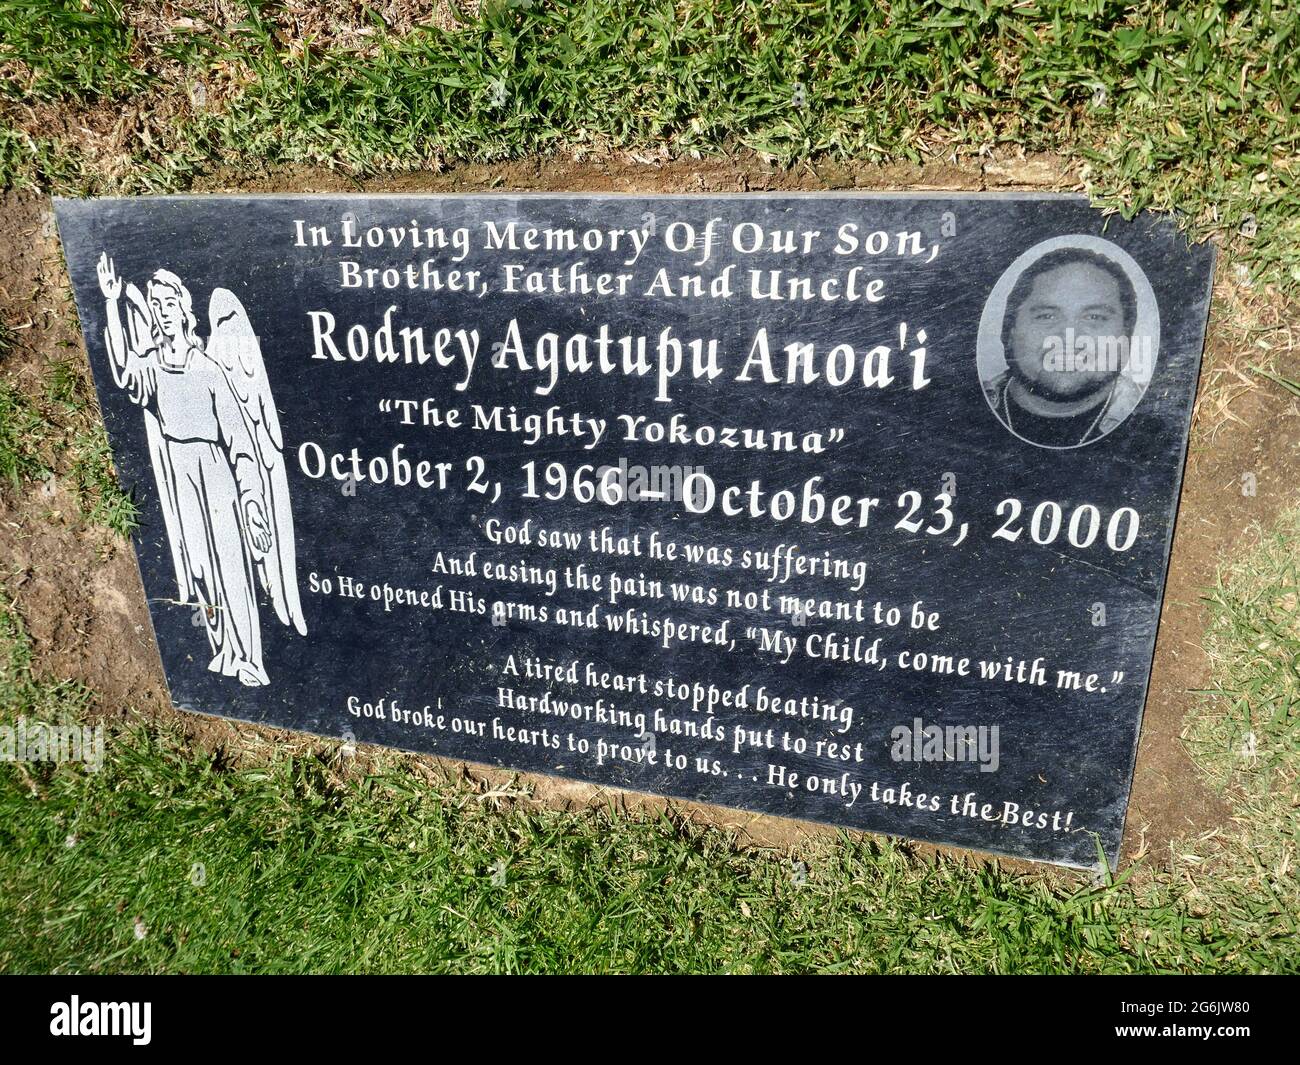 Rancho Palos Verdes, California, USA 30th June 2021 A general view of atmosphere of Professional Wrestler Rodney Agatupu 'Yokozuna' Anoai's Grave in Vista Del Sol Section at Green Hills Memorial Park at 27501 S. Western Avenue on June 30, 2021 in Rancho Palos Verdes, California, USA. He was Two Time WWF World Champion, and cousin of Dwayne The Rock Johnson. Photo by Barry King/Alamy Stock Photo Stock Photo